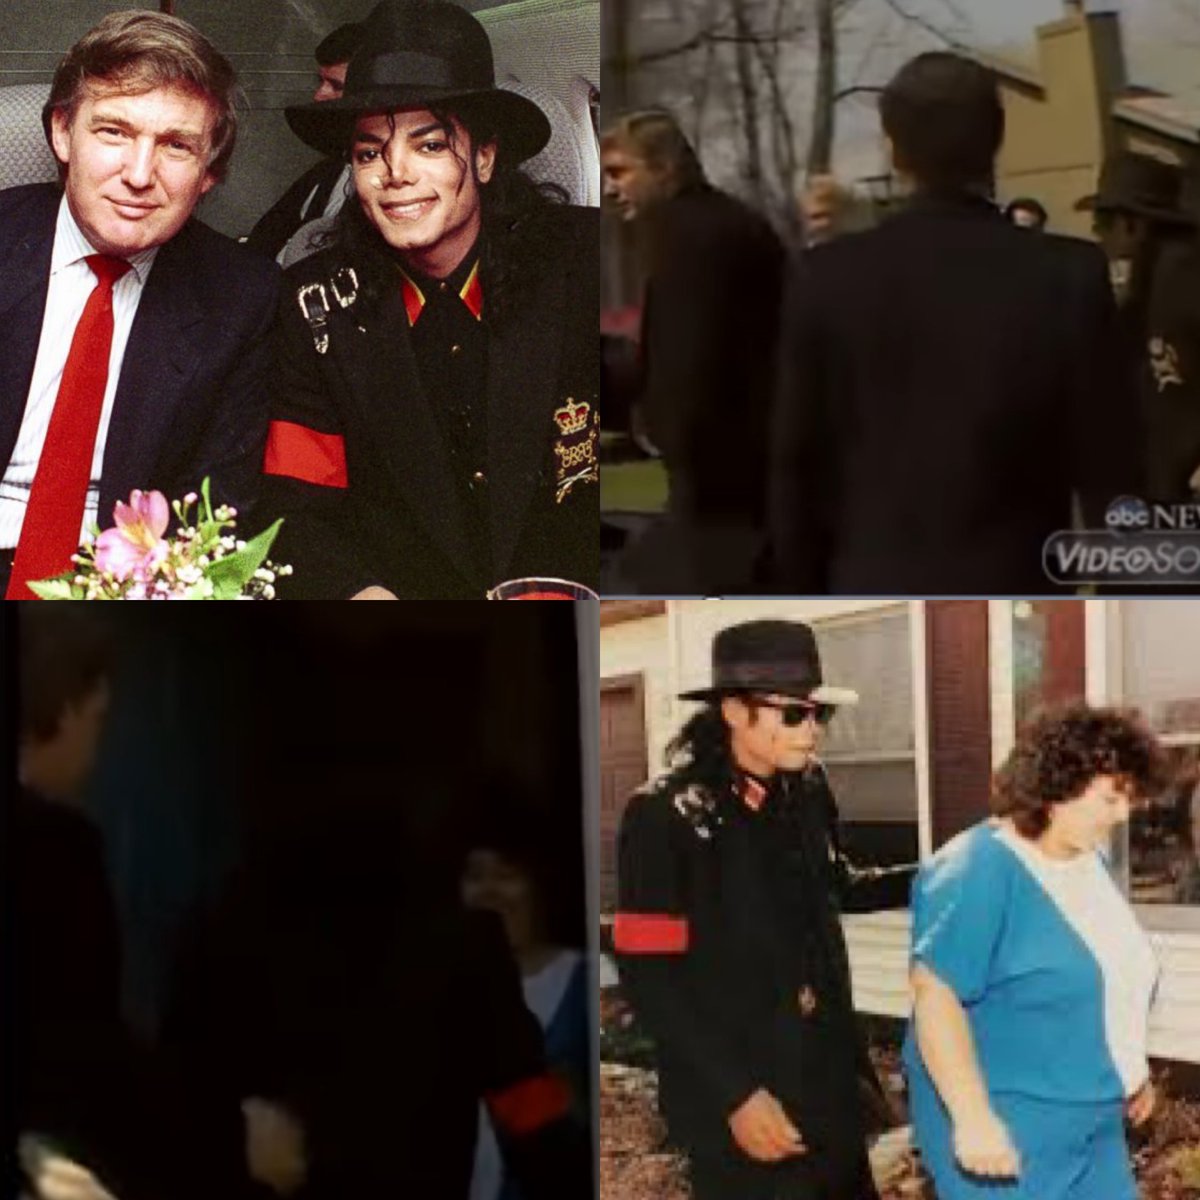 I watched news footage from April 1990 of Donald Trump hosting Michael Jackson at the new Taj Mahal casino… before the two of them boarded a private plane to take an emergency flight to Indiana and visit Ryan White’s family the day he died. Feels like an end to the 1980s.